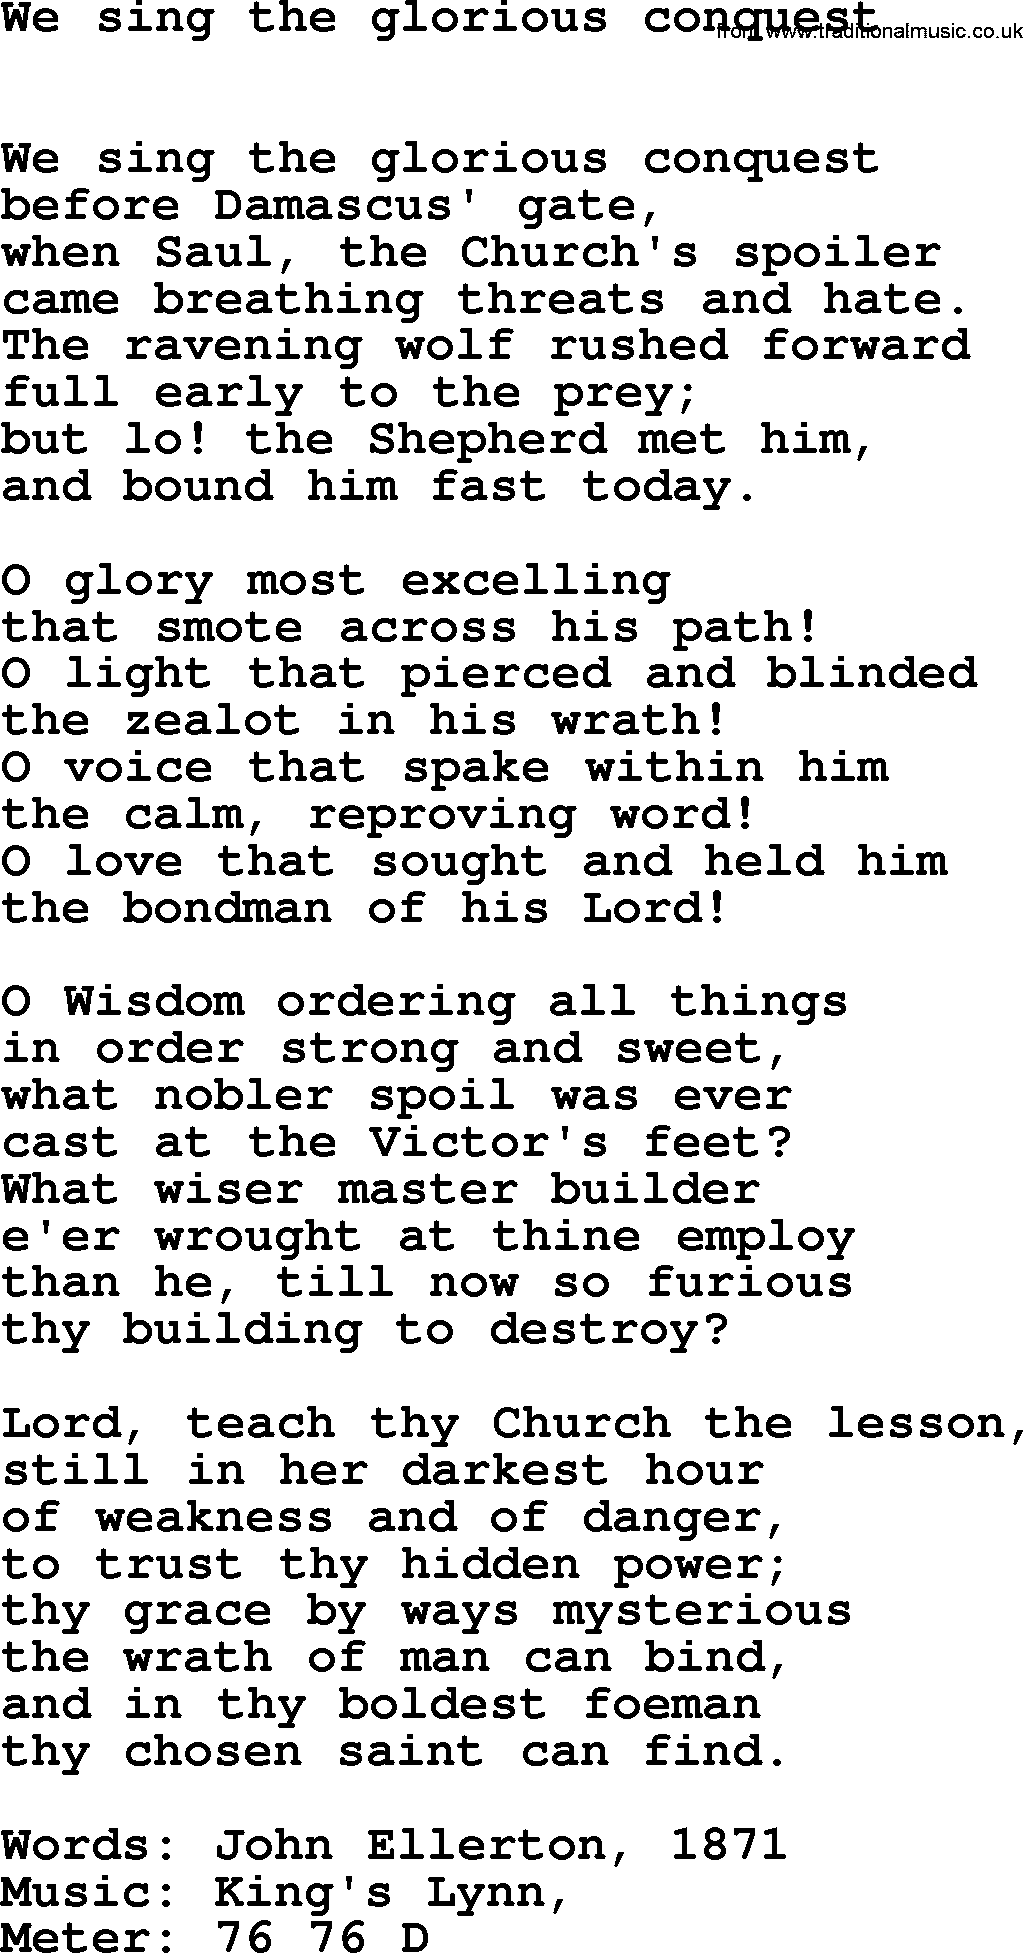 Book of Common Praise Hymn: We Sing The Glorious Conquest.txt lyrics with midi music